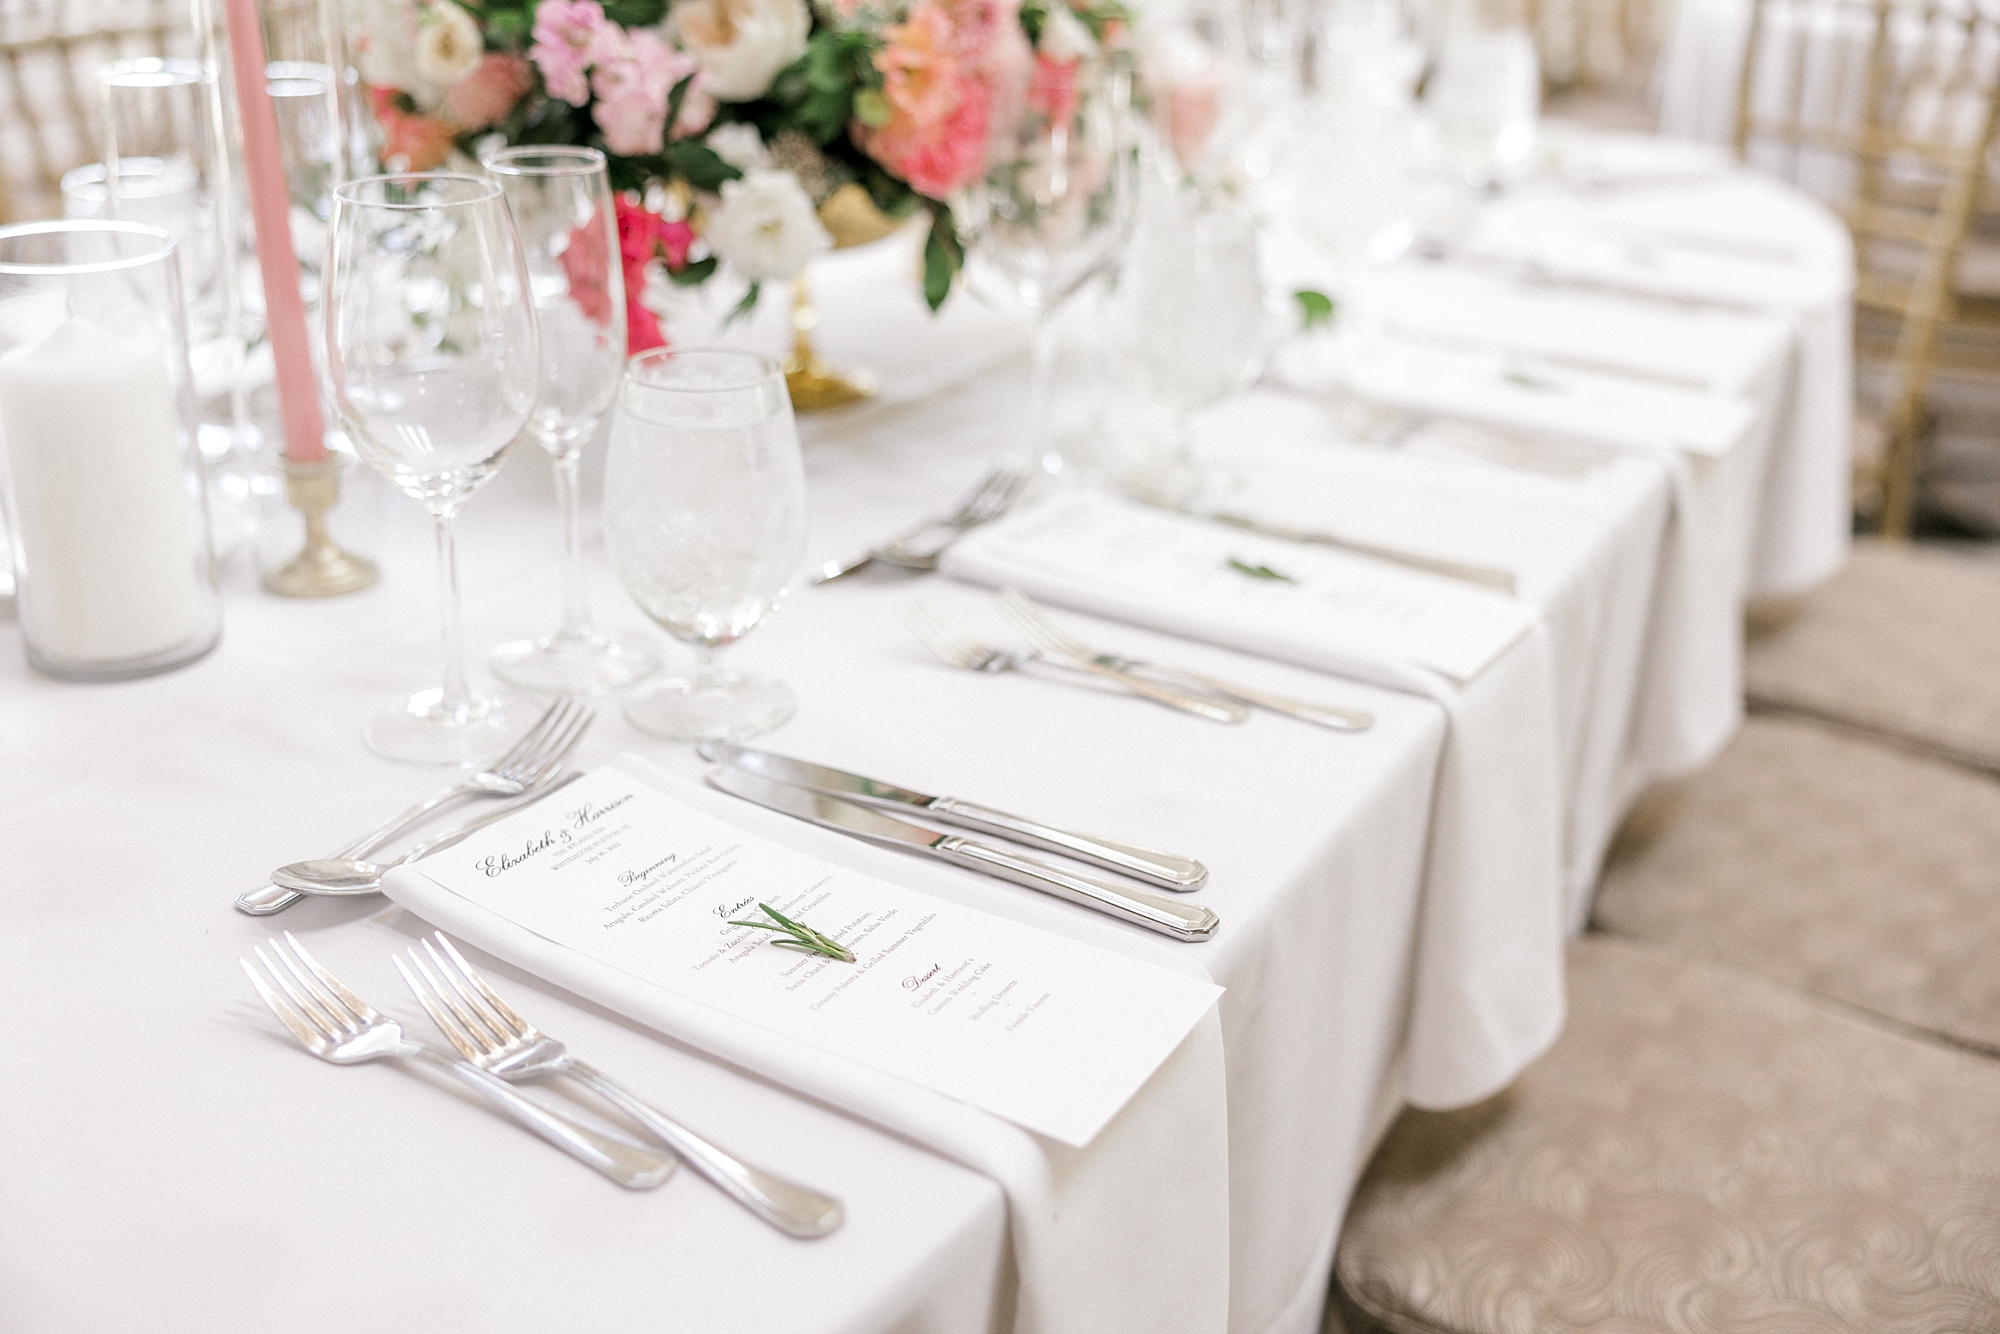 place settings with menu cards and white napkins